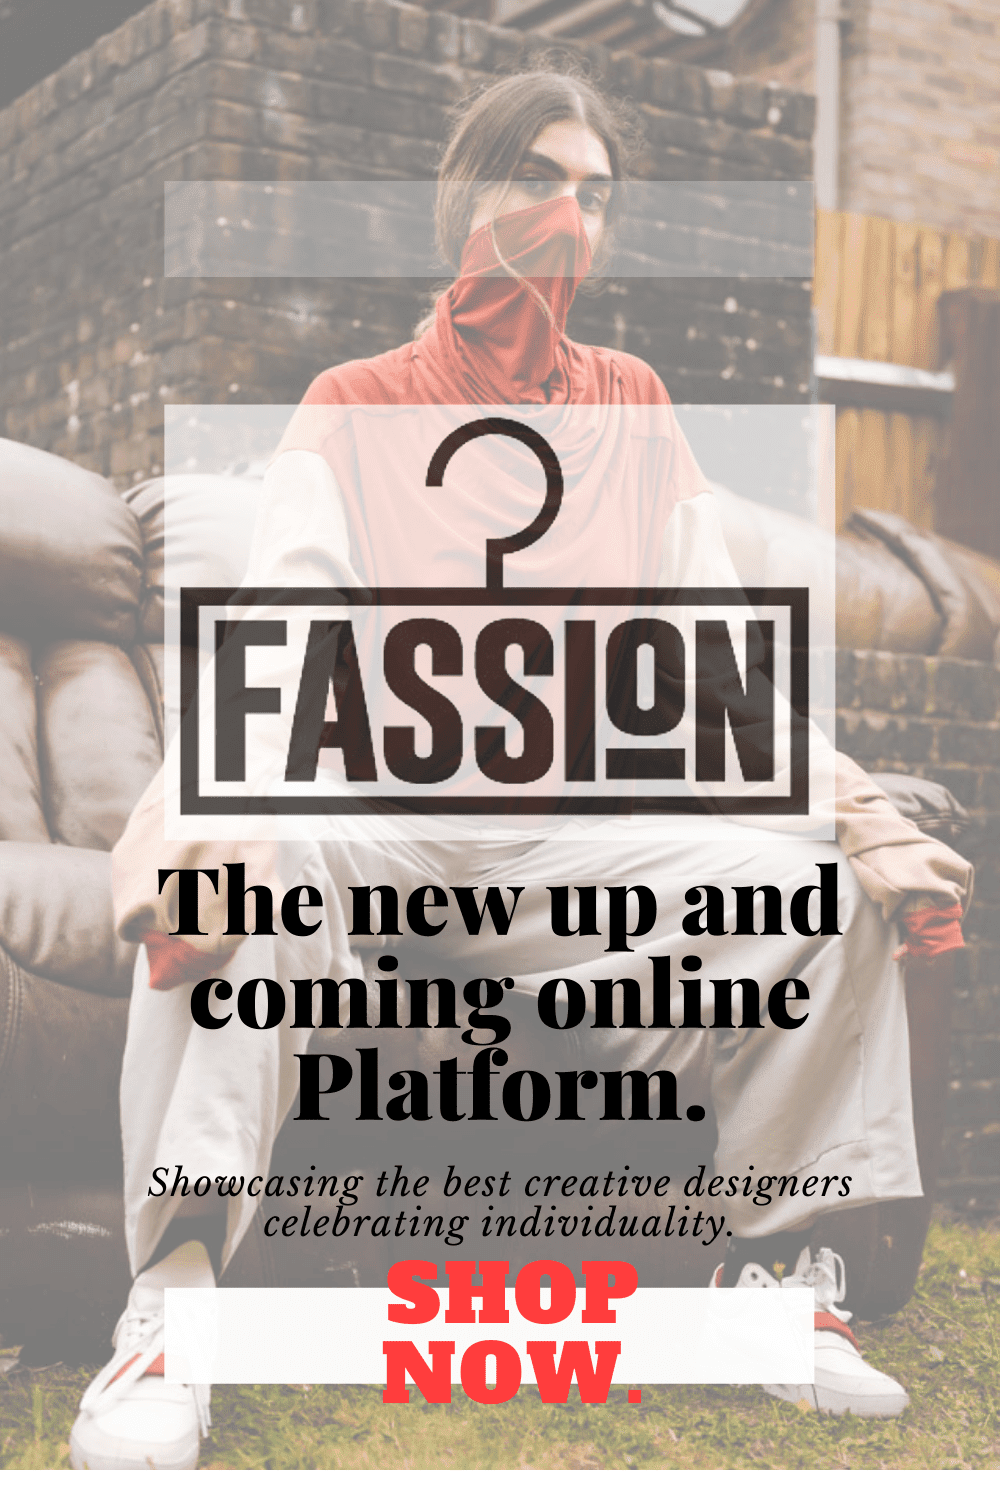 Fassion Pinterest pin to show new online platform showcasing creative designers who express individuality.